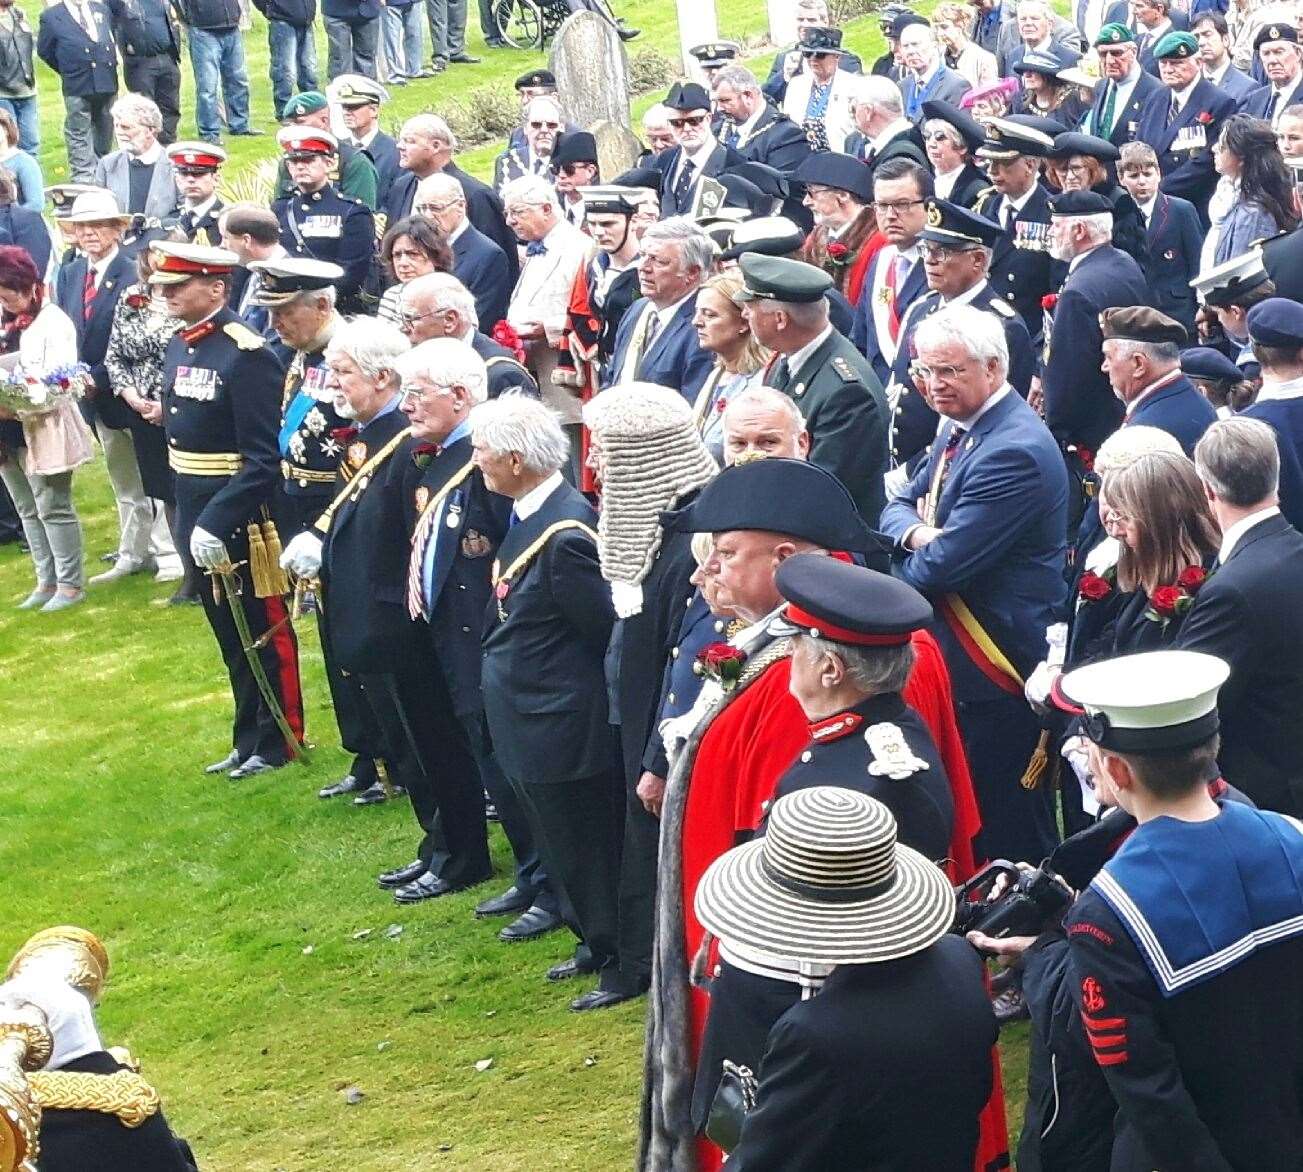 Dignitaries at last year's cemetery commemoration at St James' Cemetery